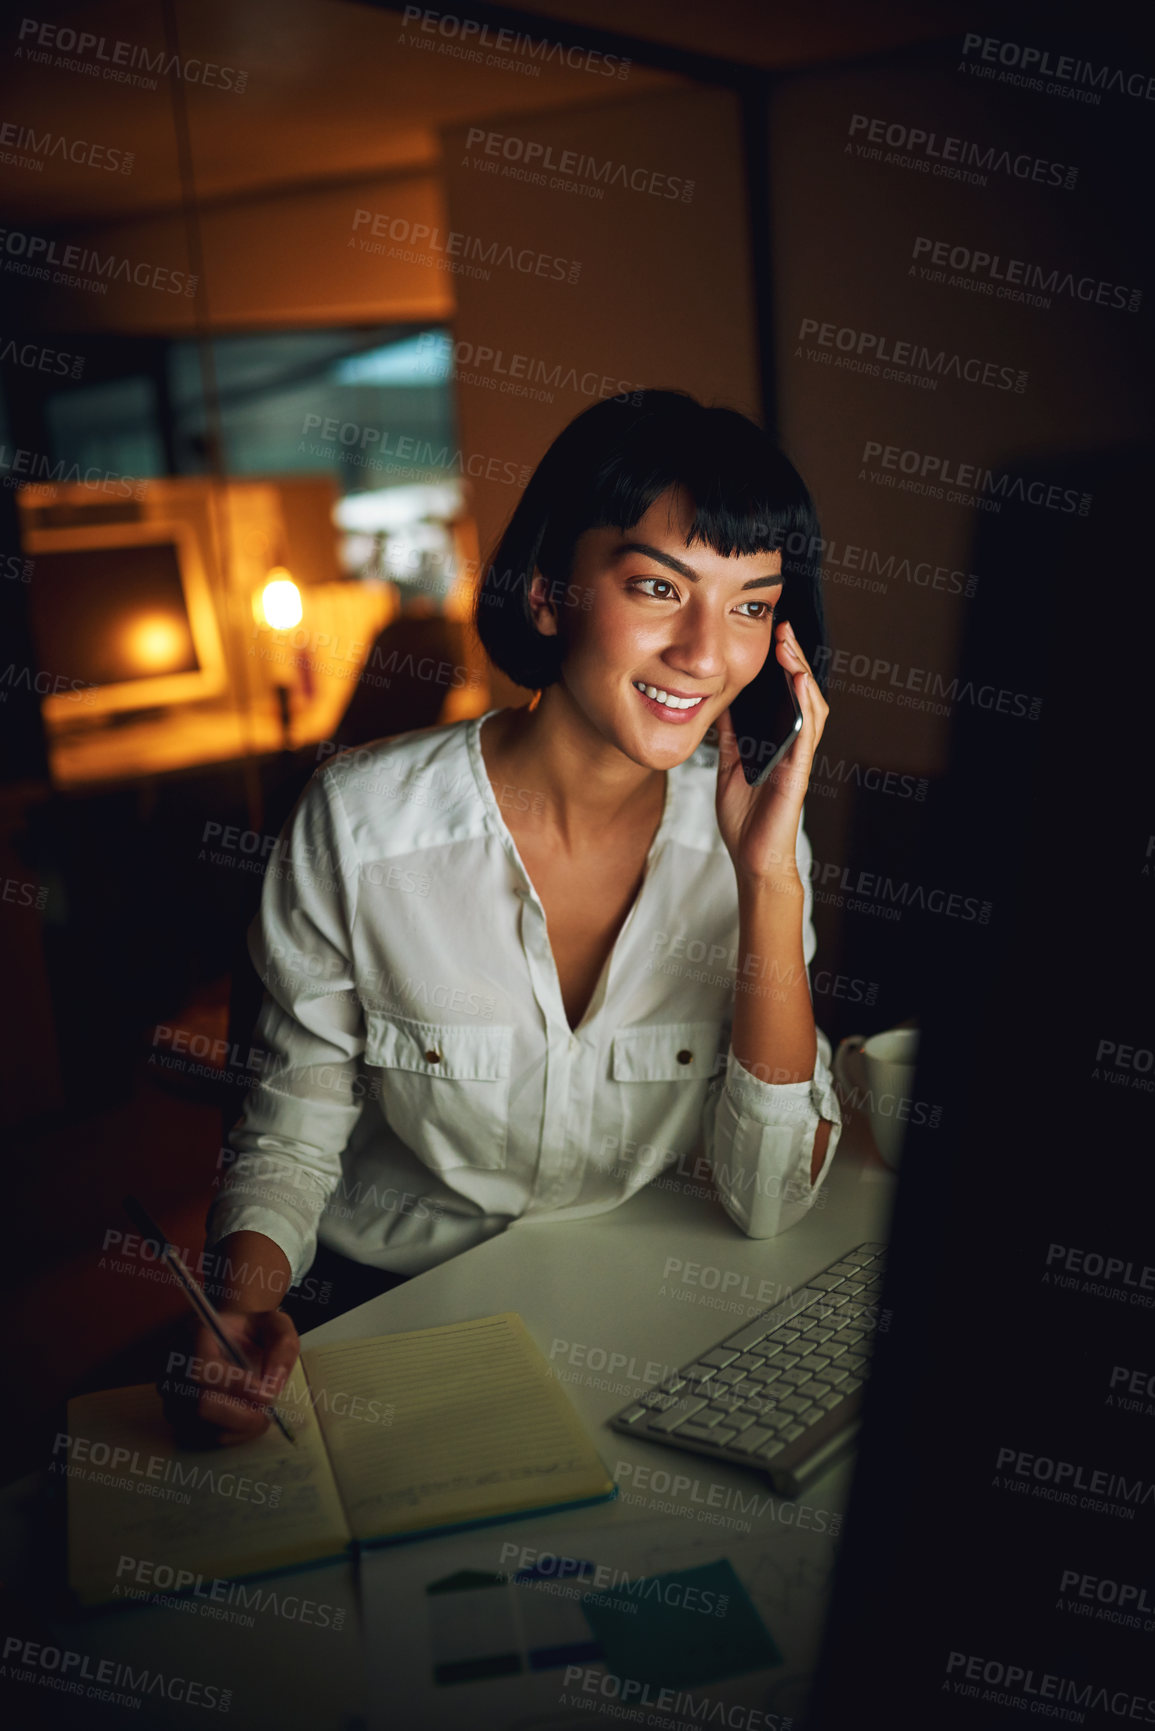 Buy stock photo Shot of a young businesswoman using a mobile phone and computer during a late night at work